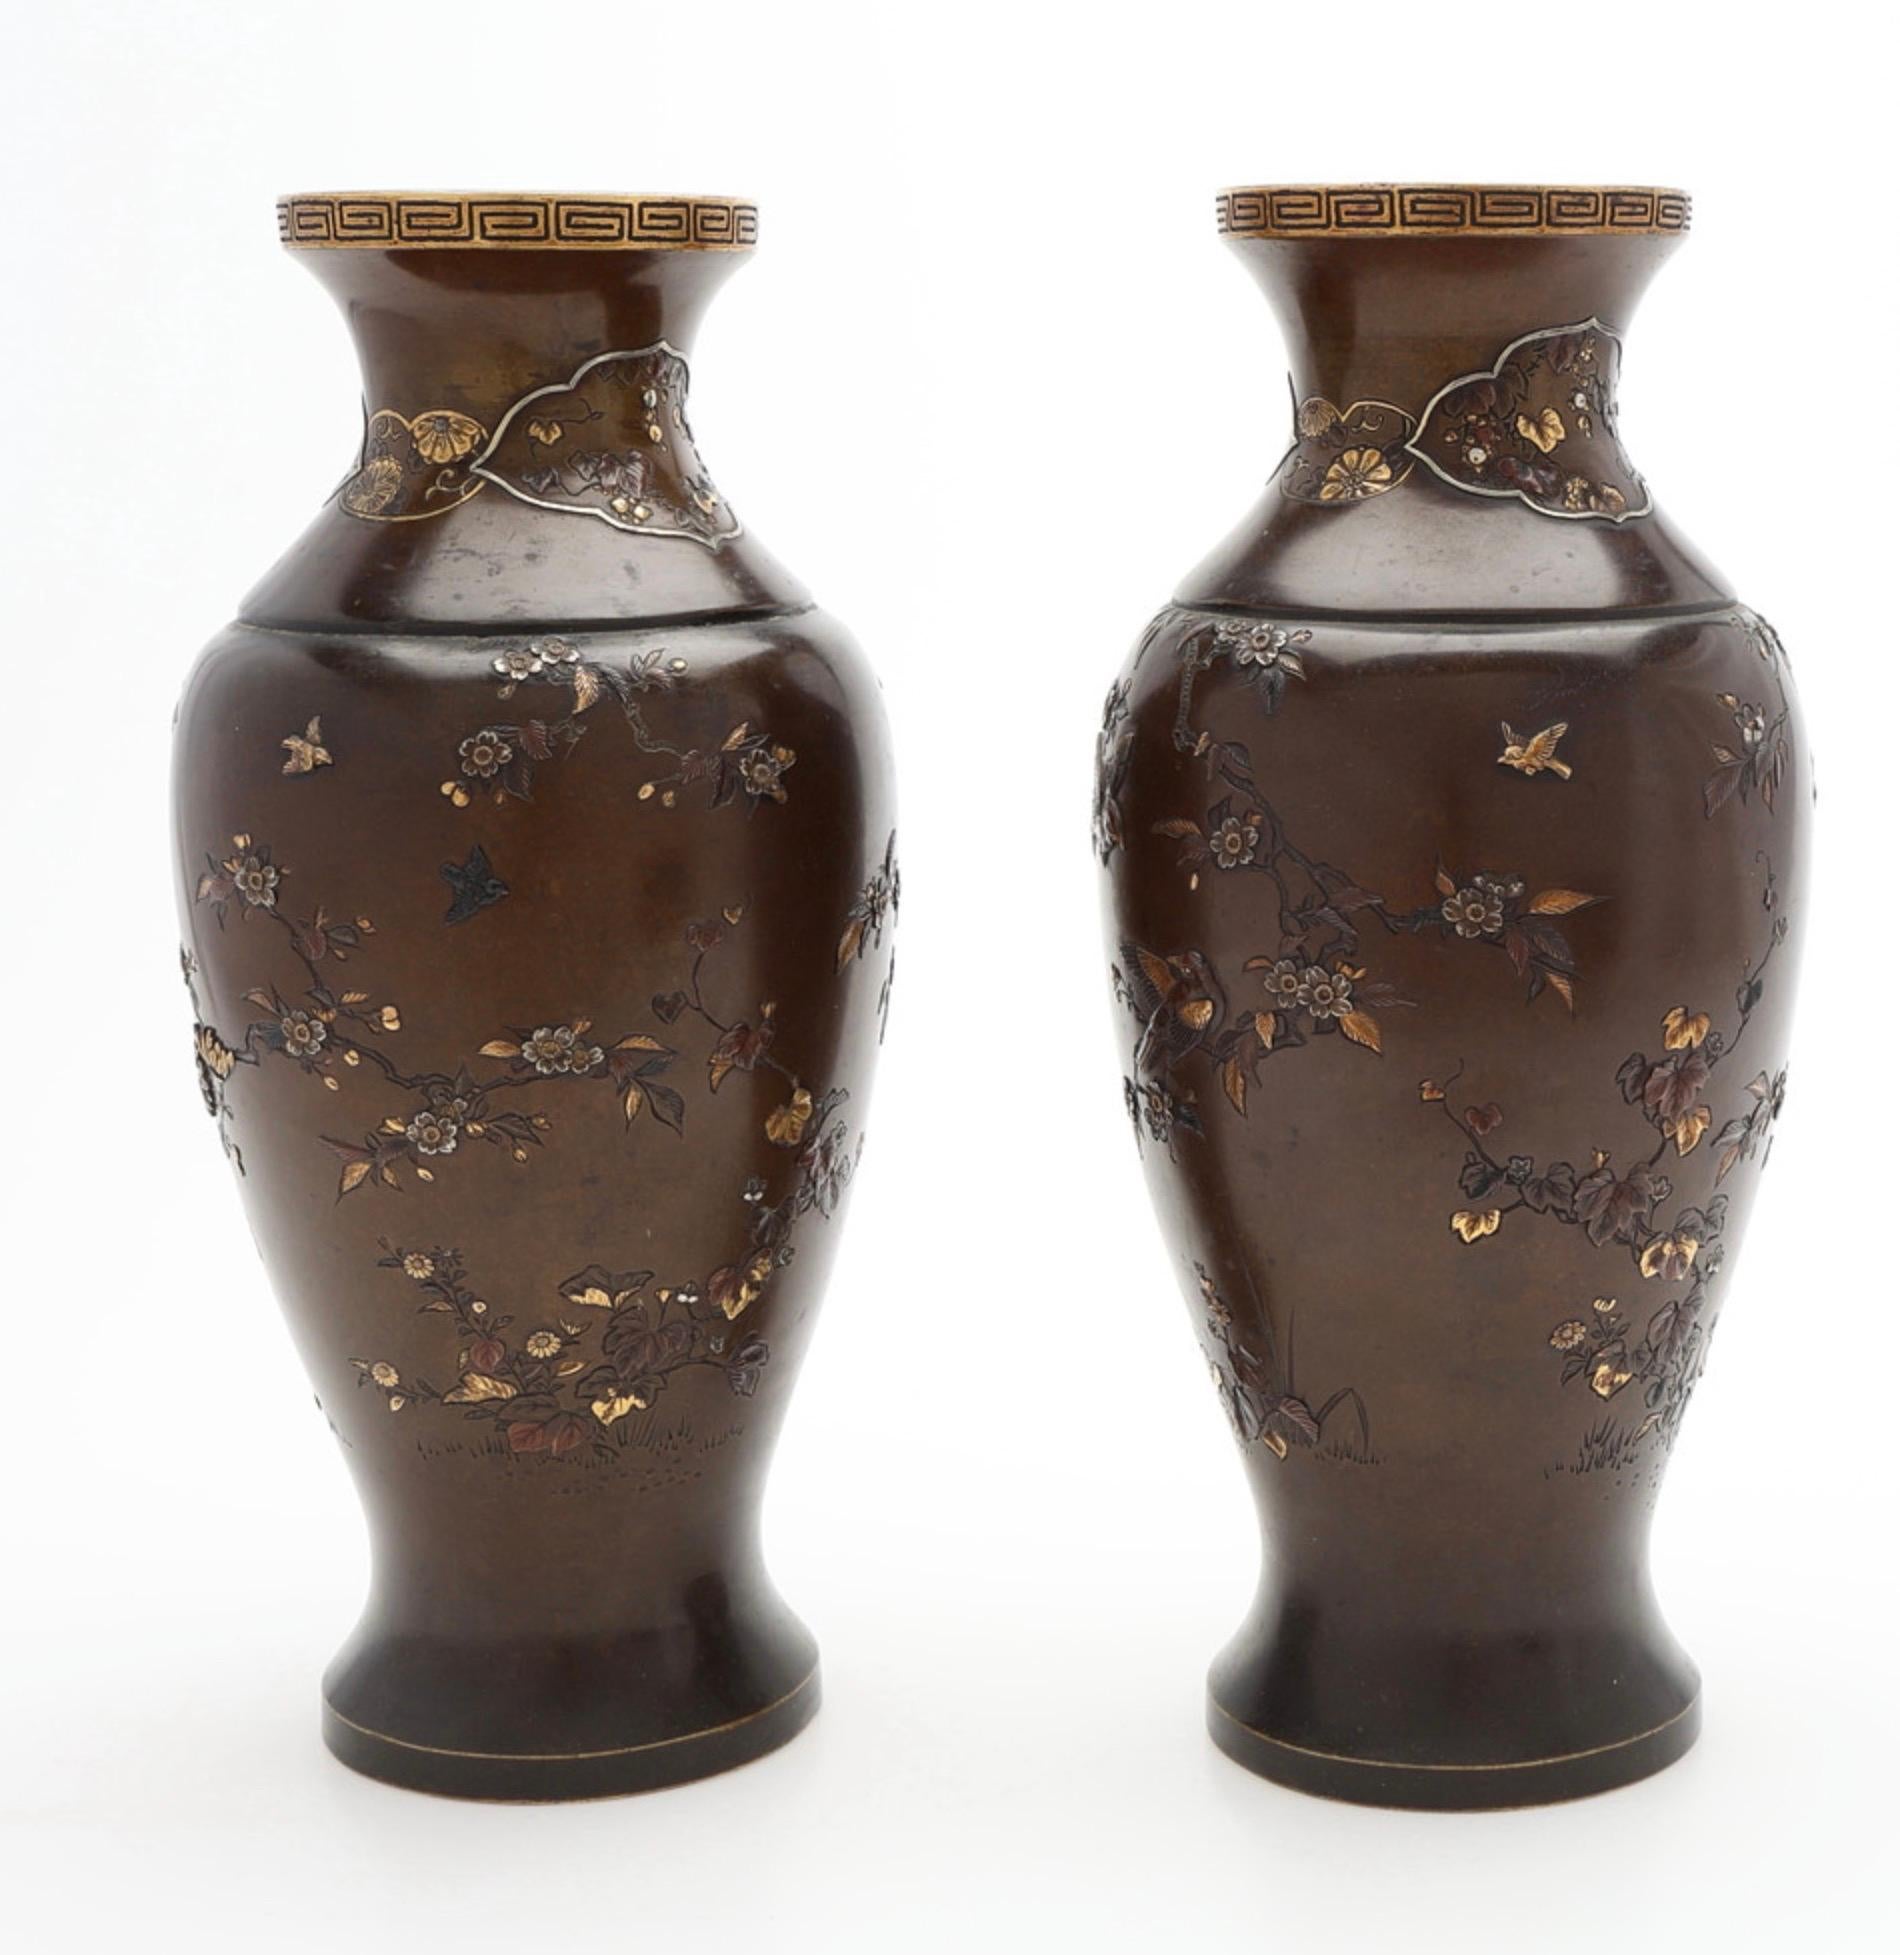 Pair of Japanese urns. 19th c. Meiji period. Signed. For Sale 4